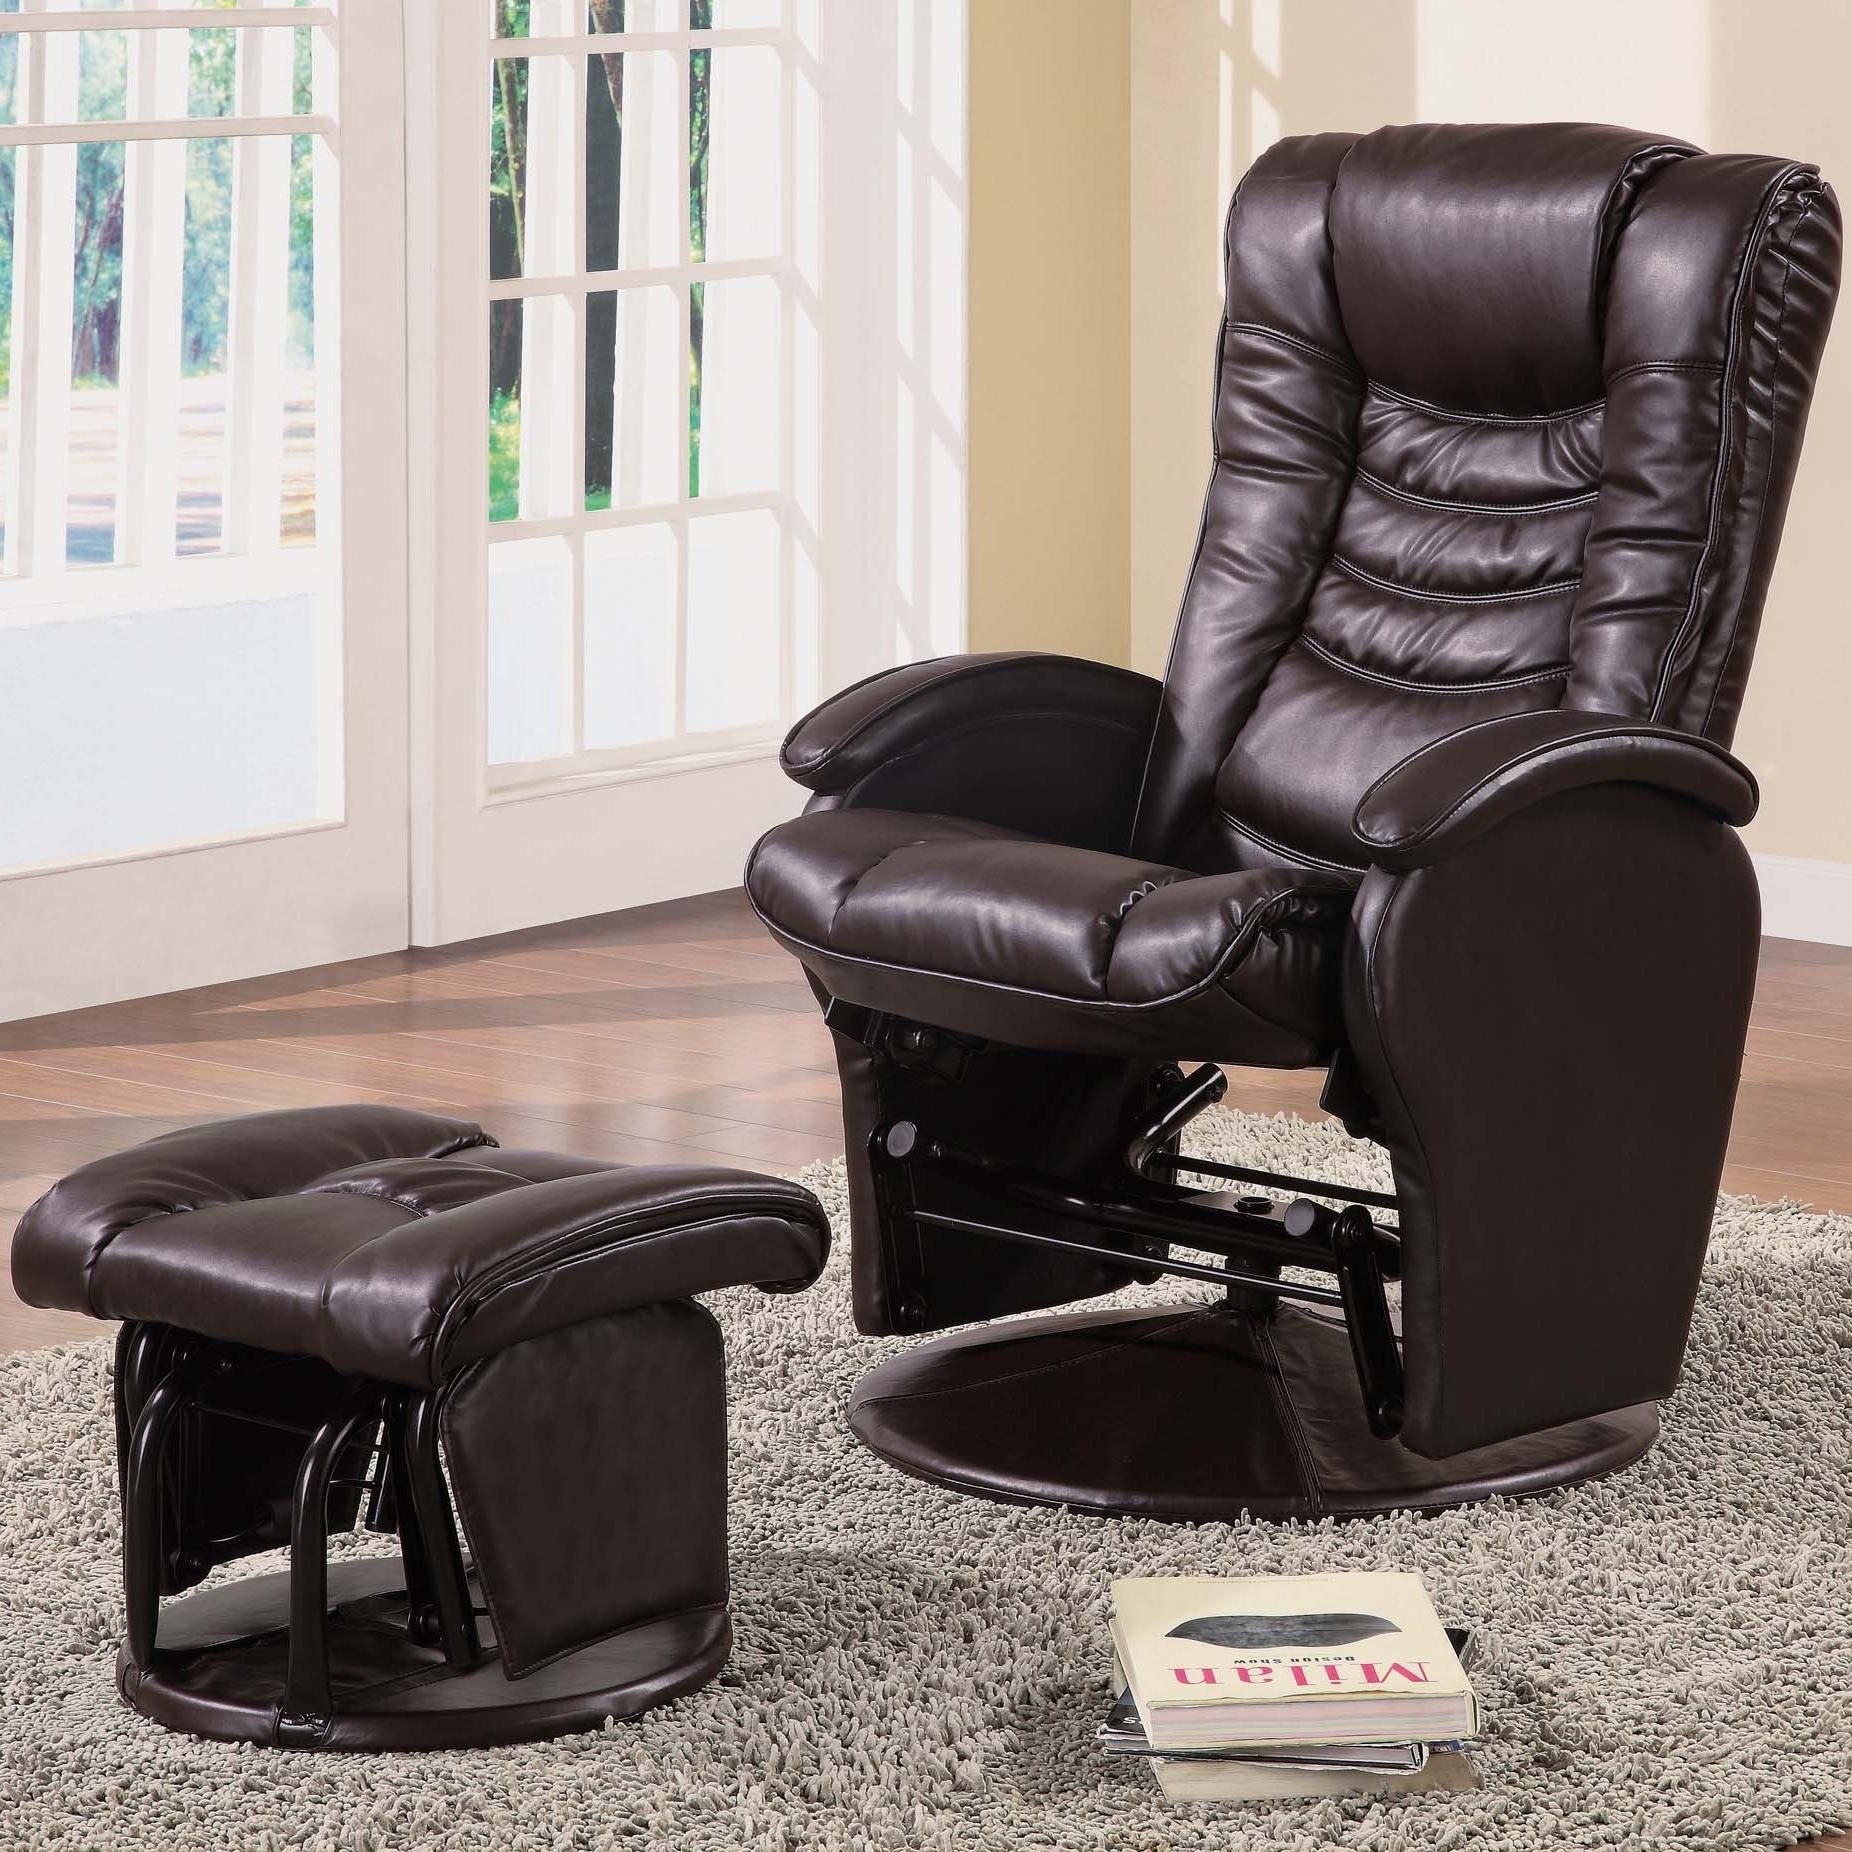 Swivel glider chair with ottoman